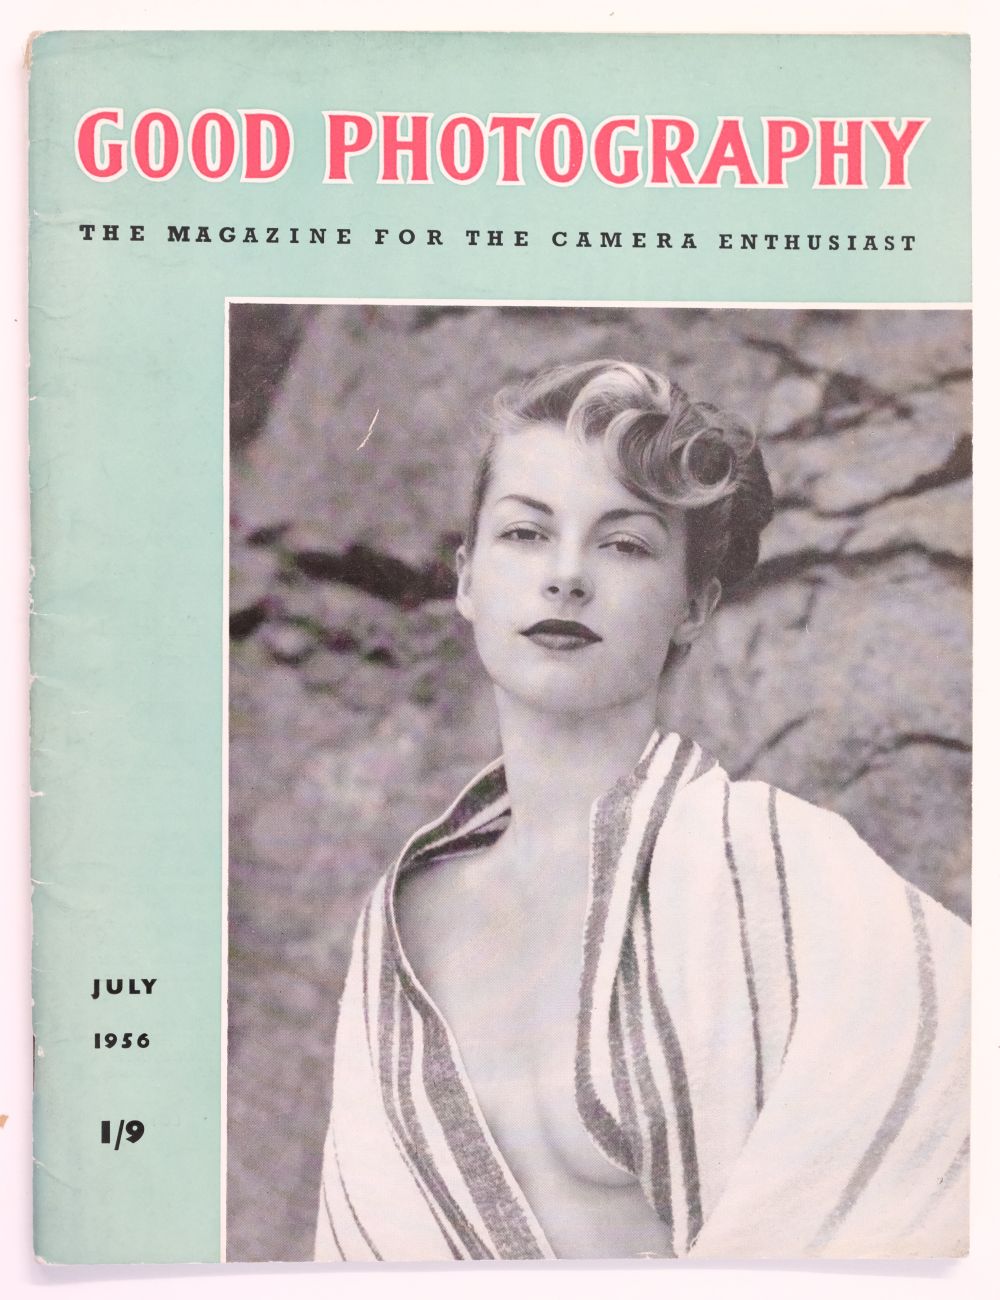 Photography Periodicals. A large collection of photography periodicals, circa 1940s